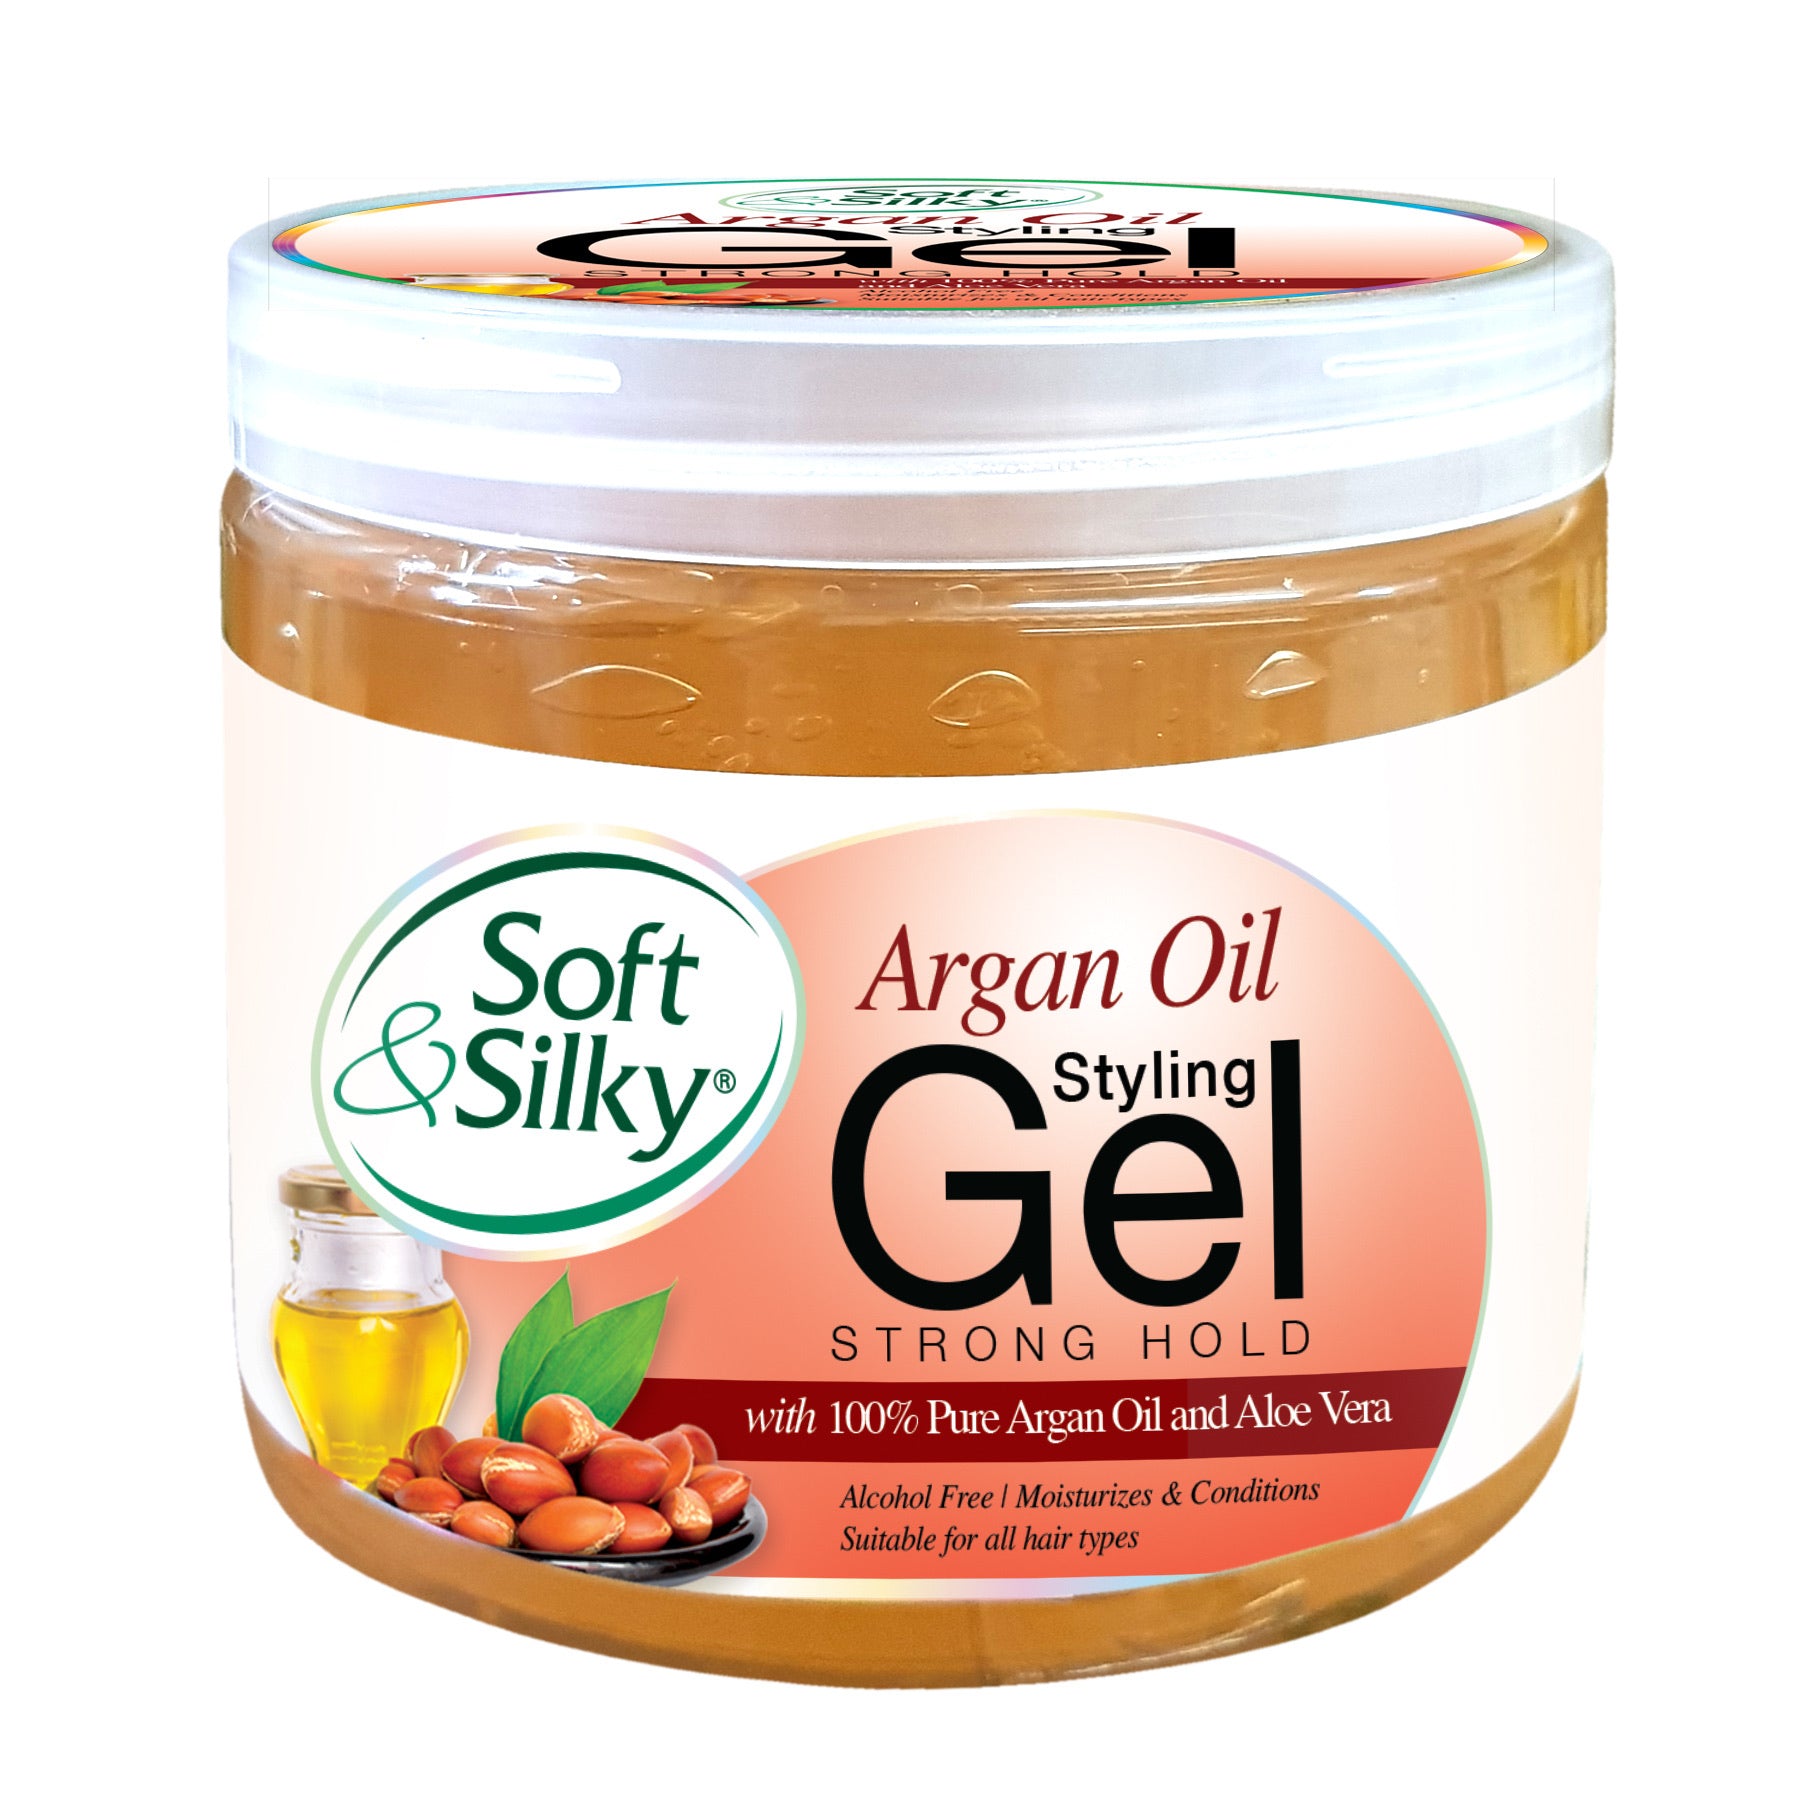 Soft & silky styling gel with argon oil strong hold 6/15oz